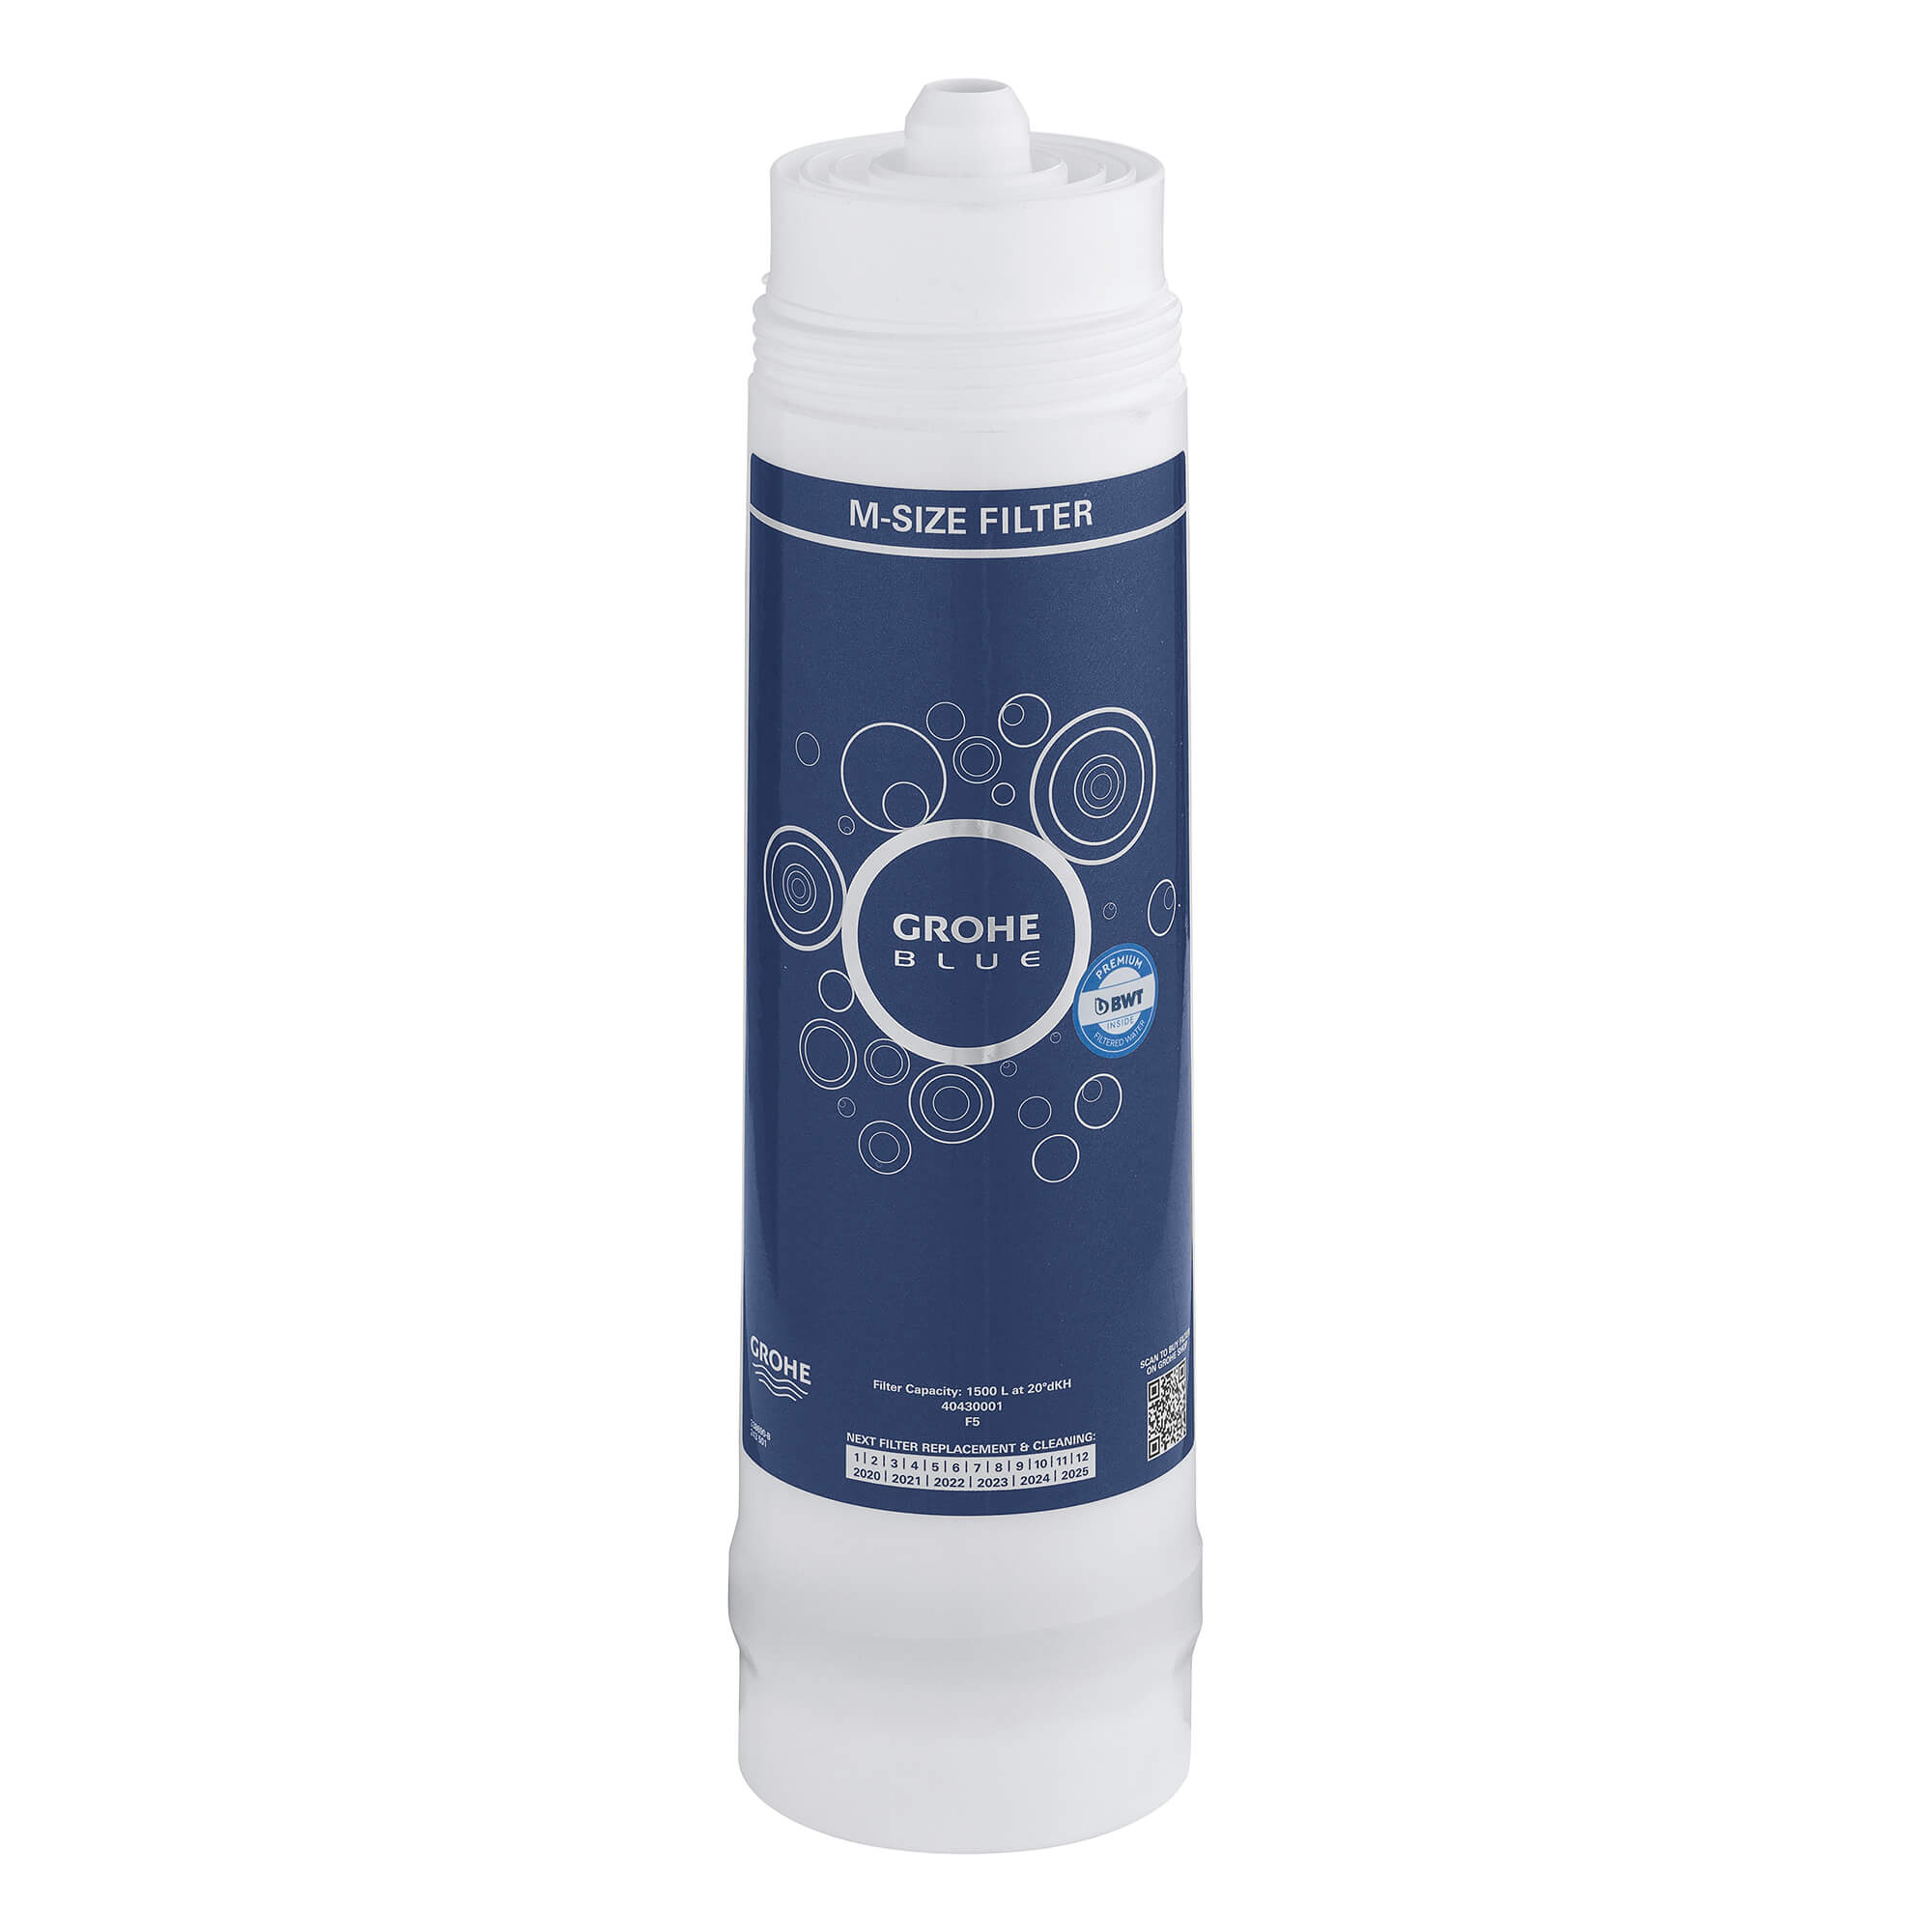 GROHE Blue® Carbon Filter, M-Size